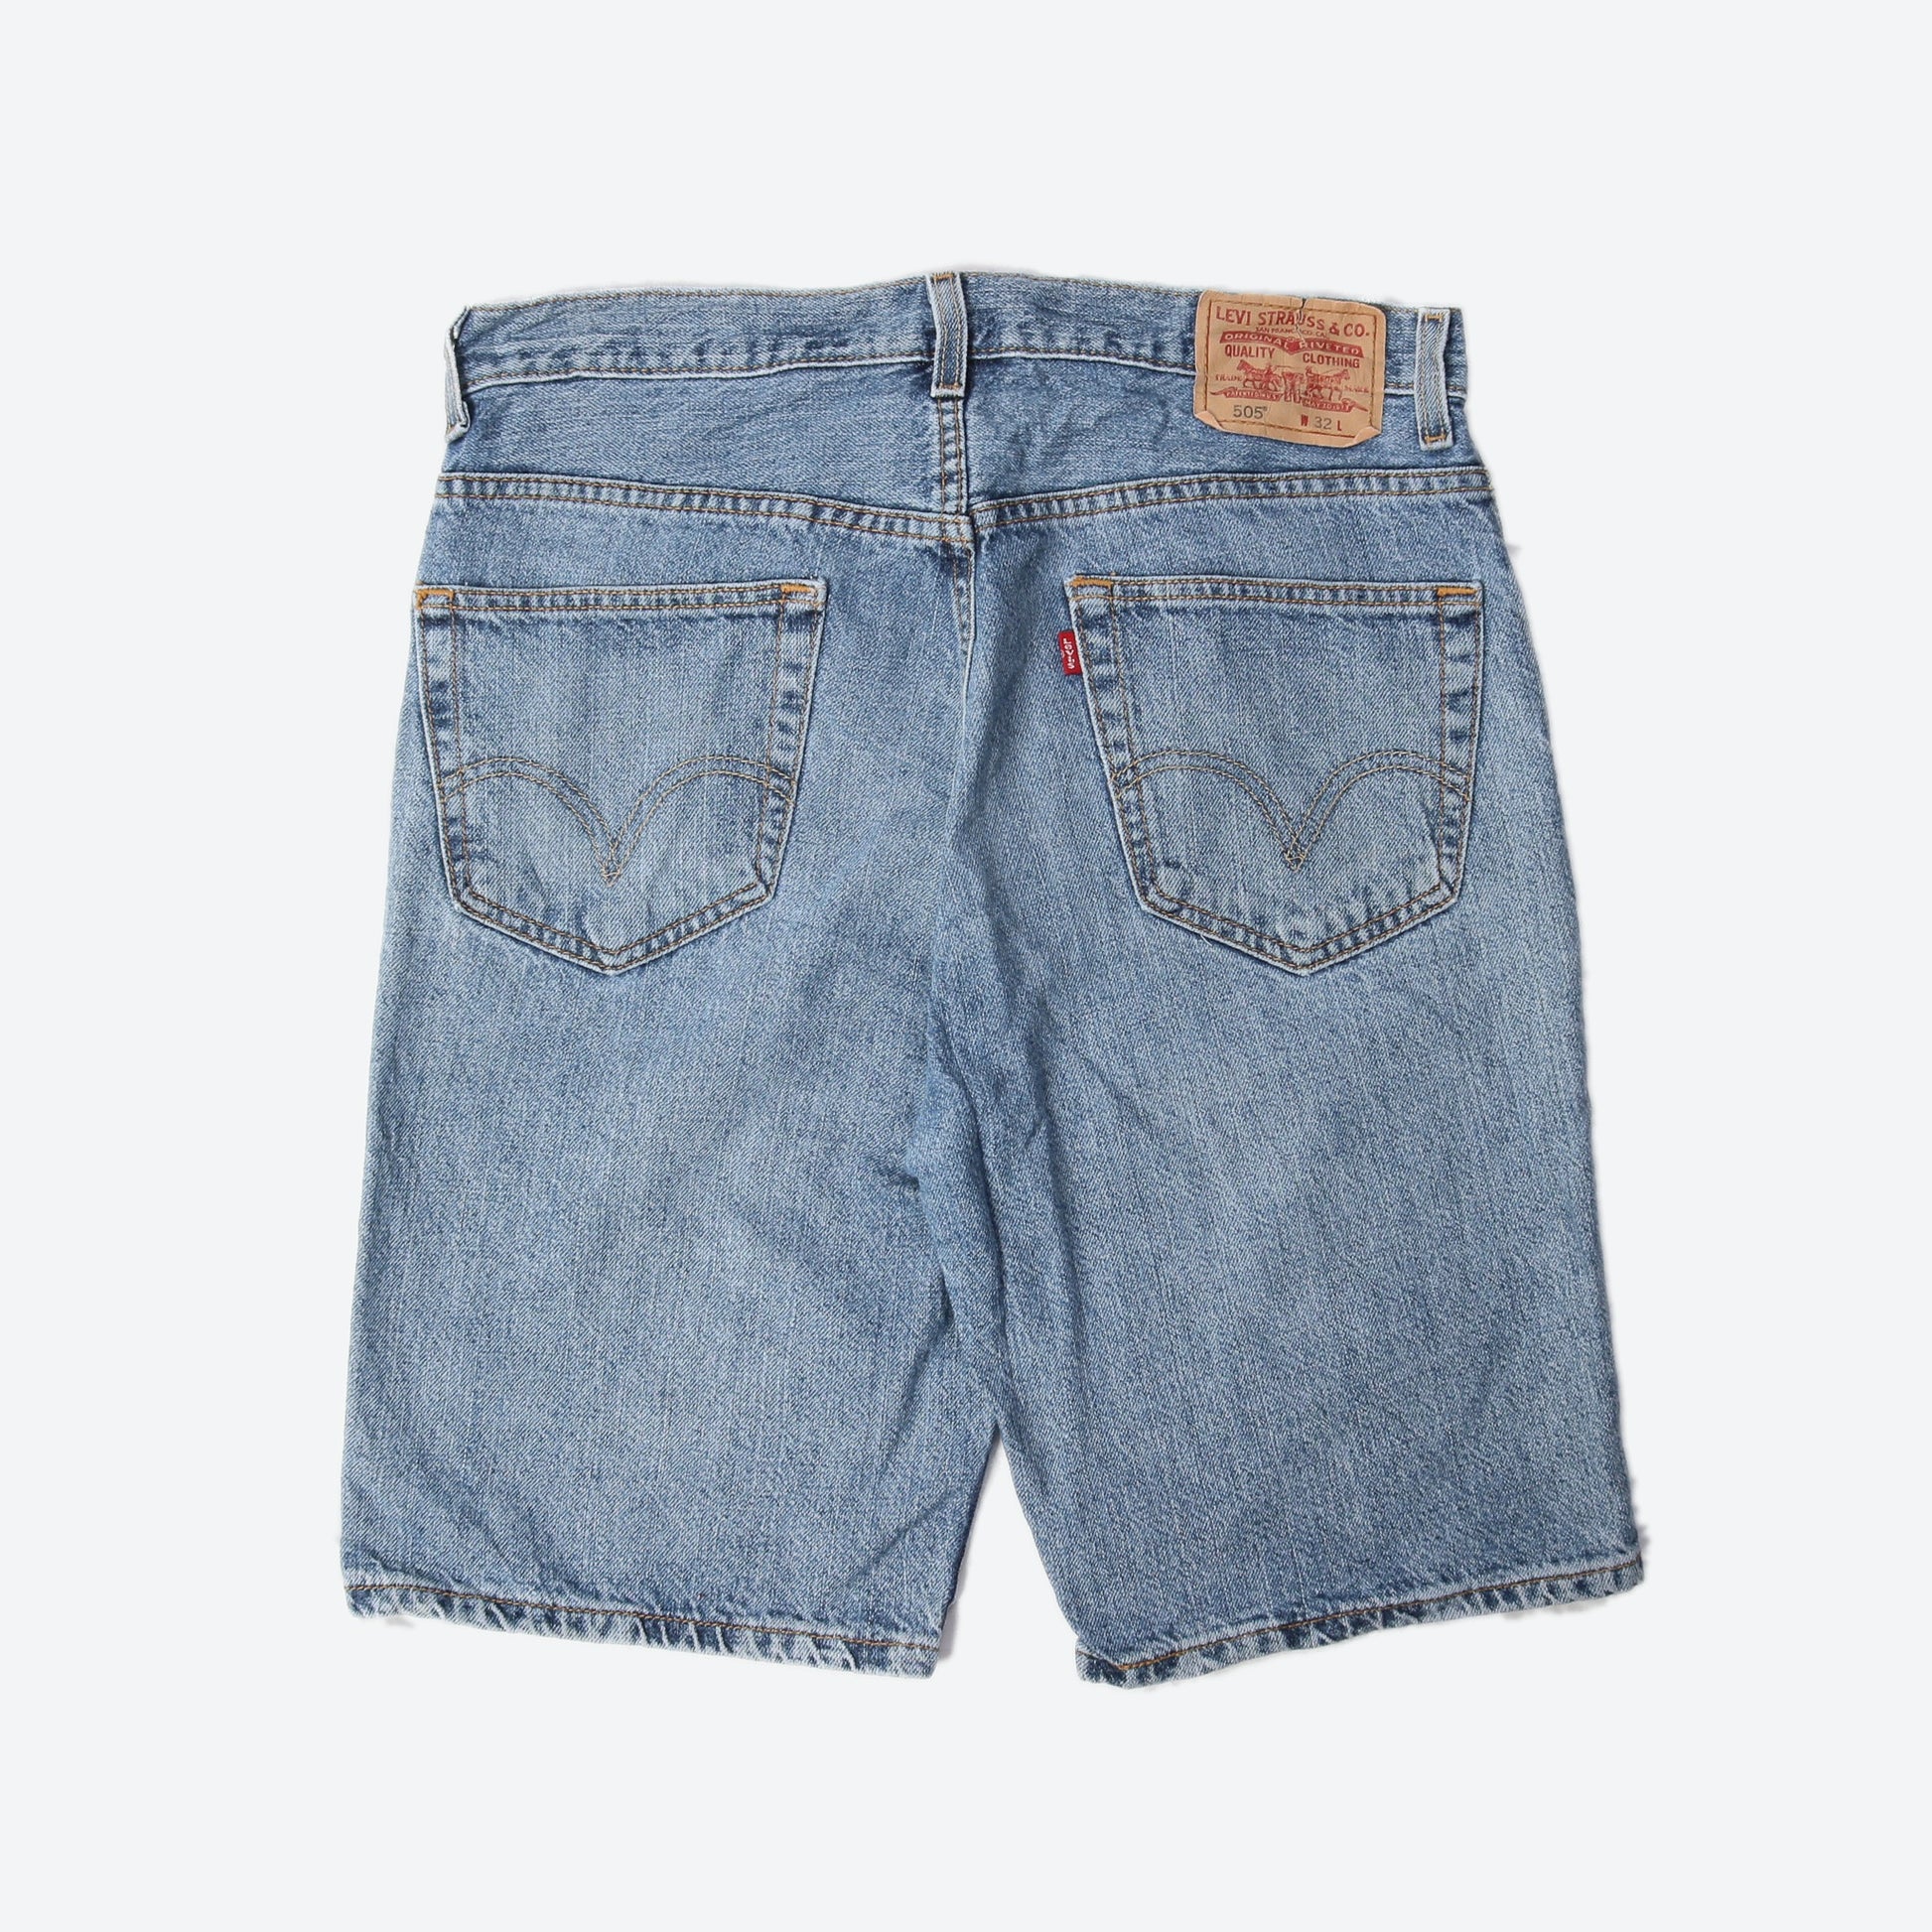 Vintage 505 Shorts - 32" - American Madness